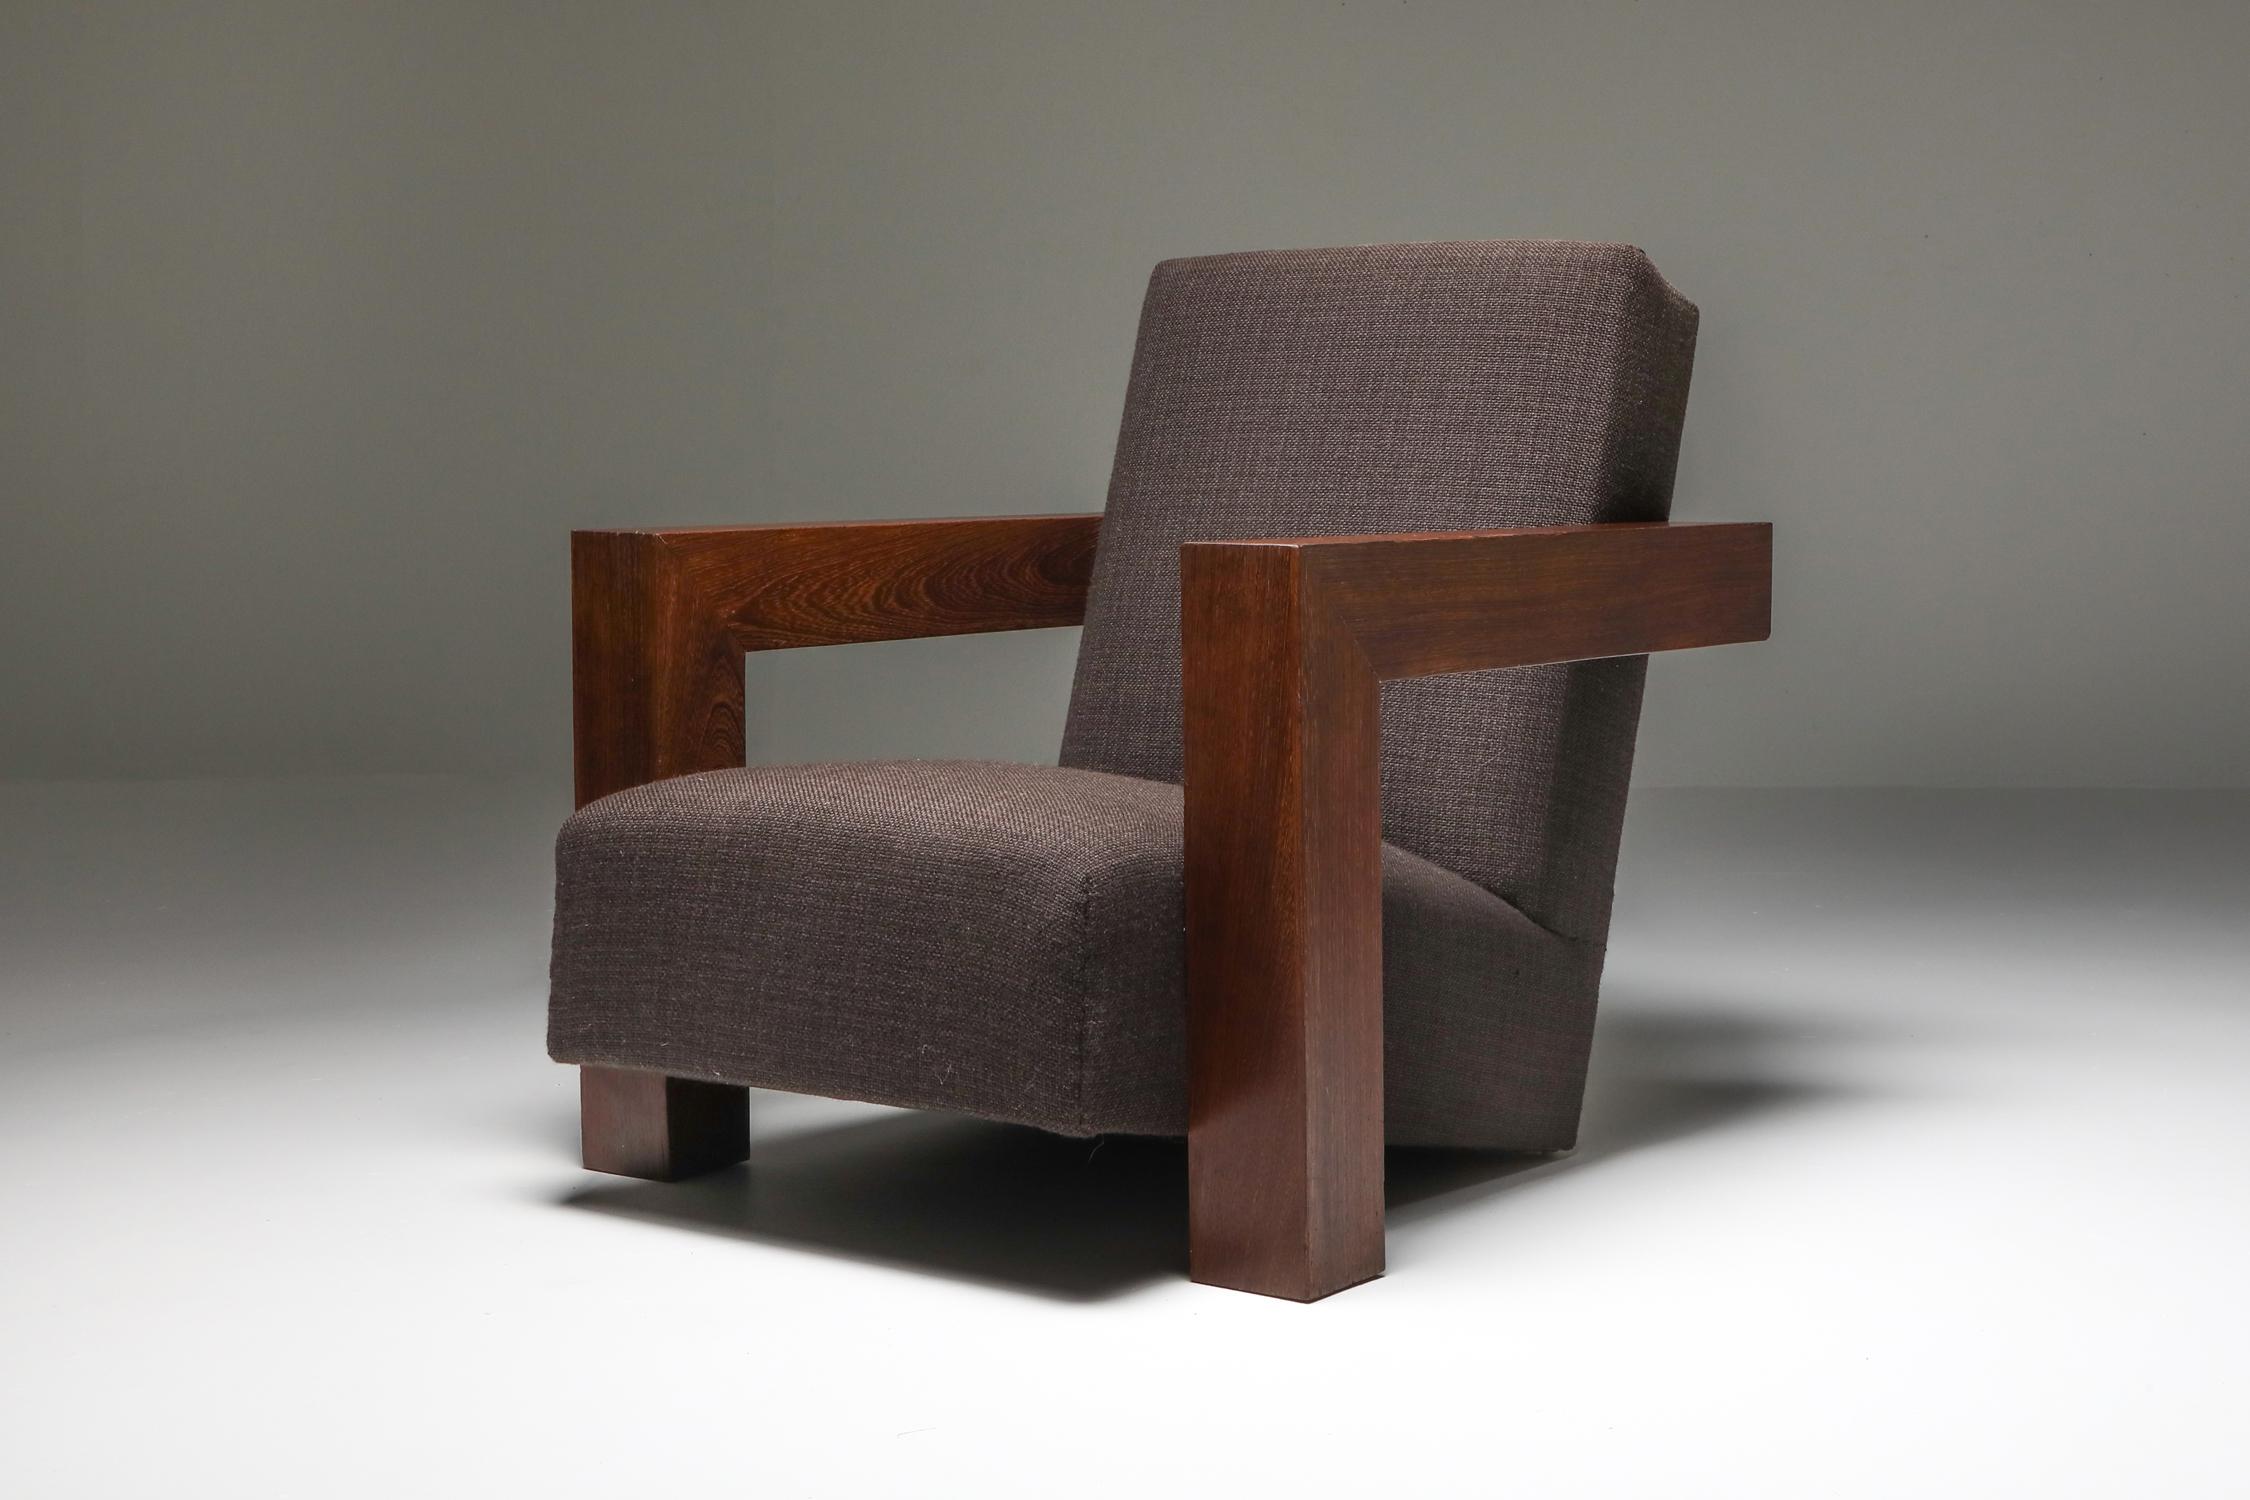 Mid-20th Century Rietveld's Utrecht Chair with a Wooden Frame, a Pair